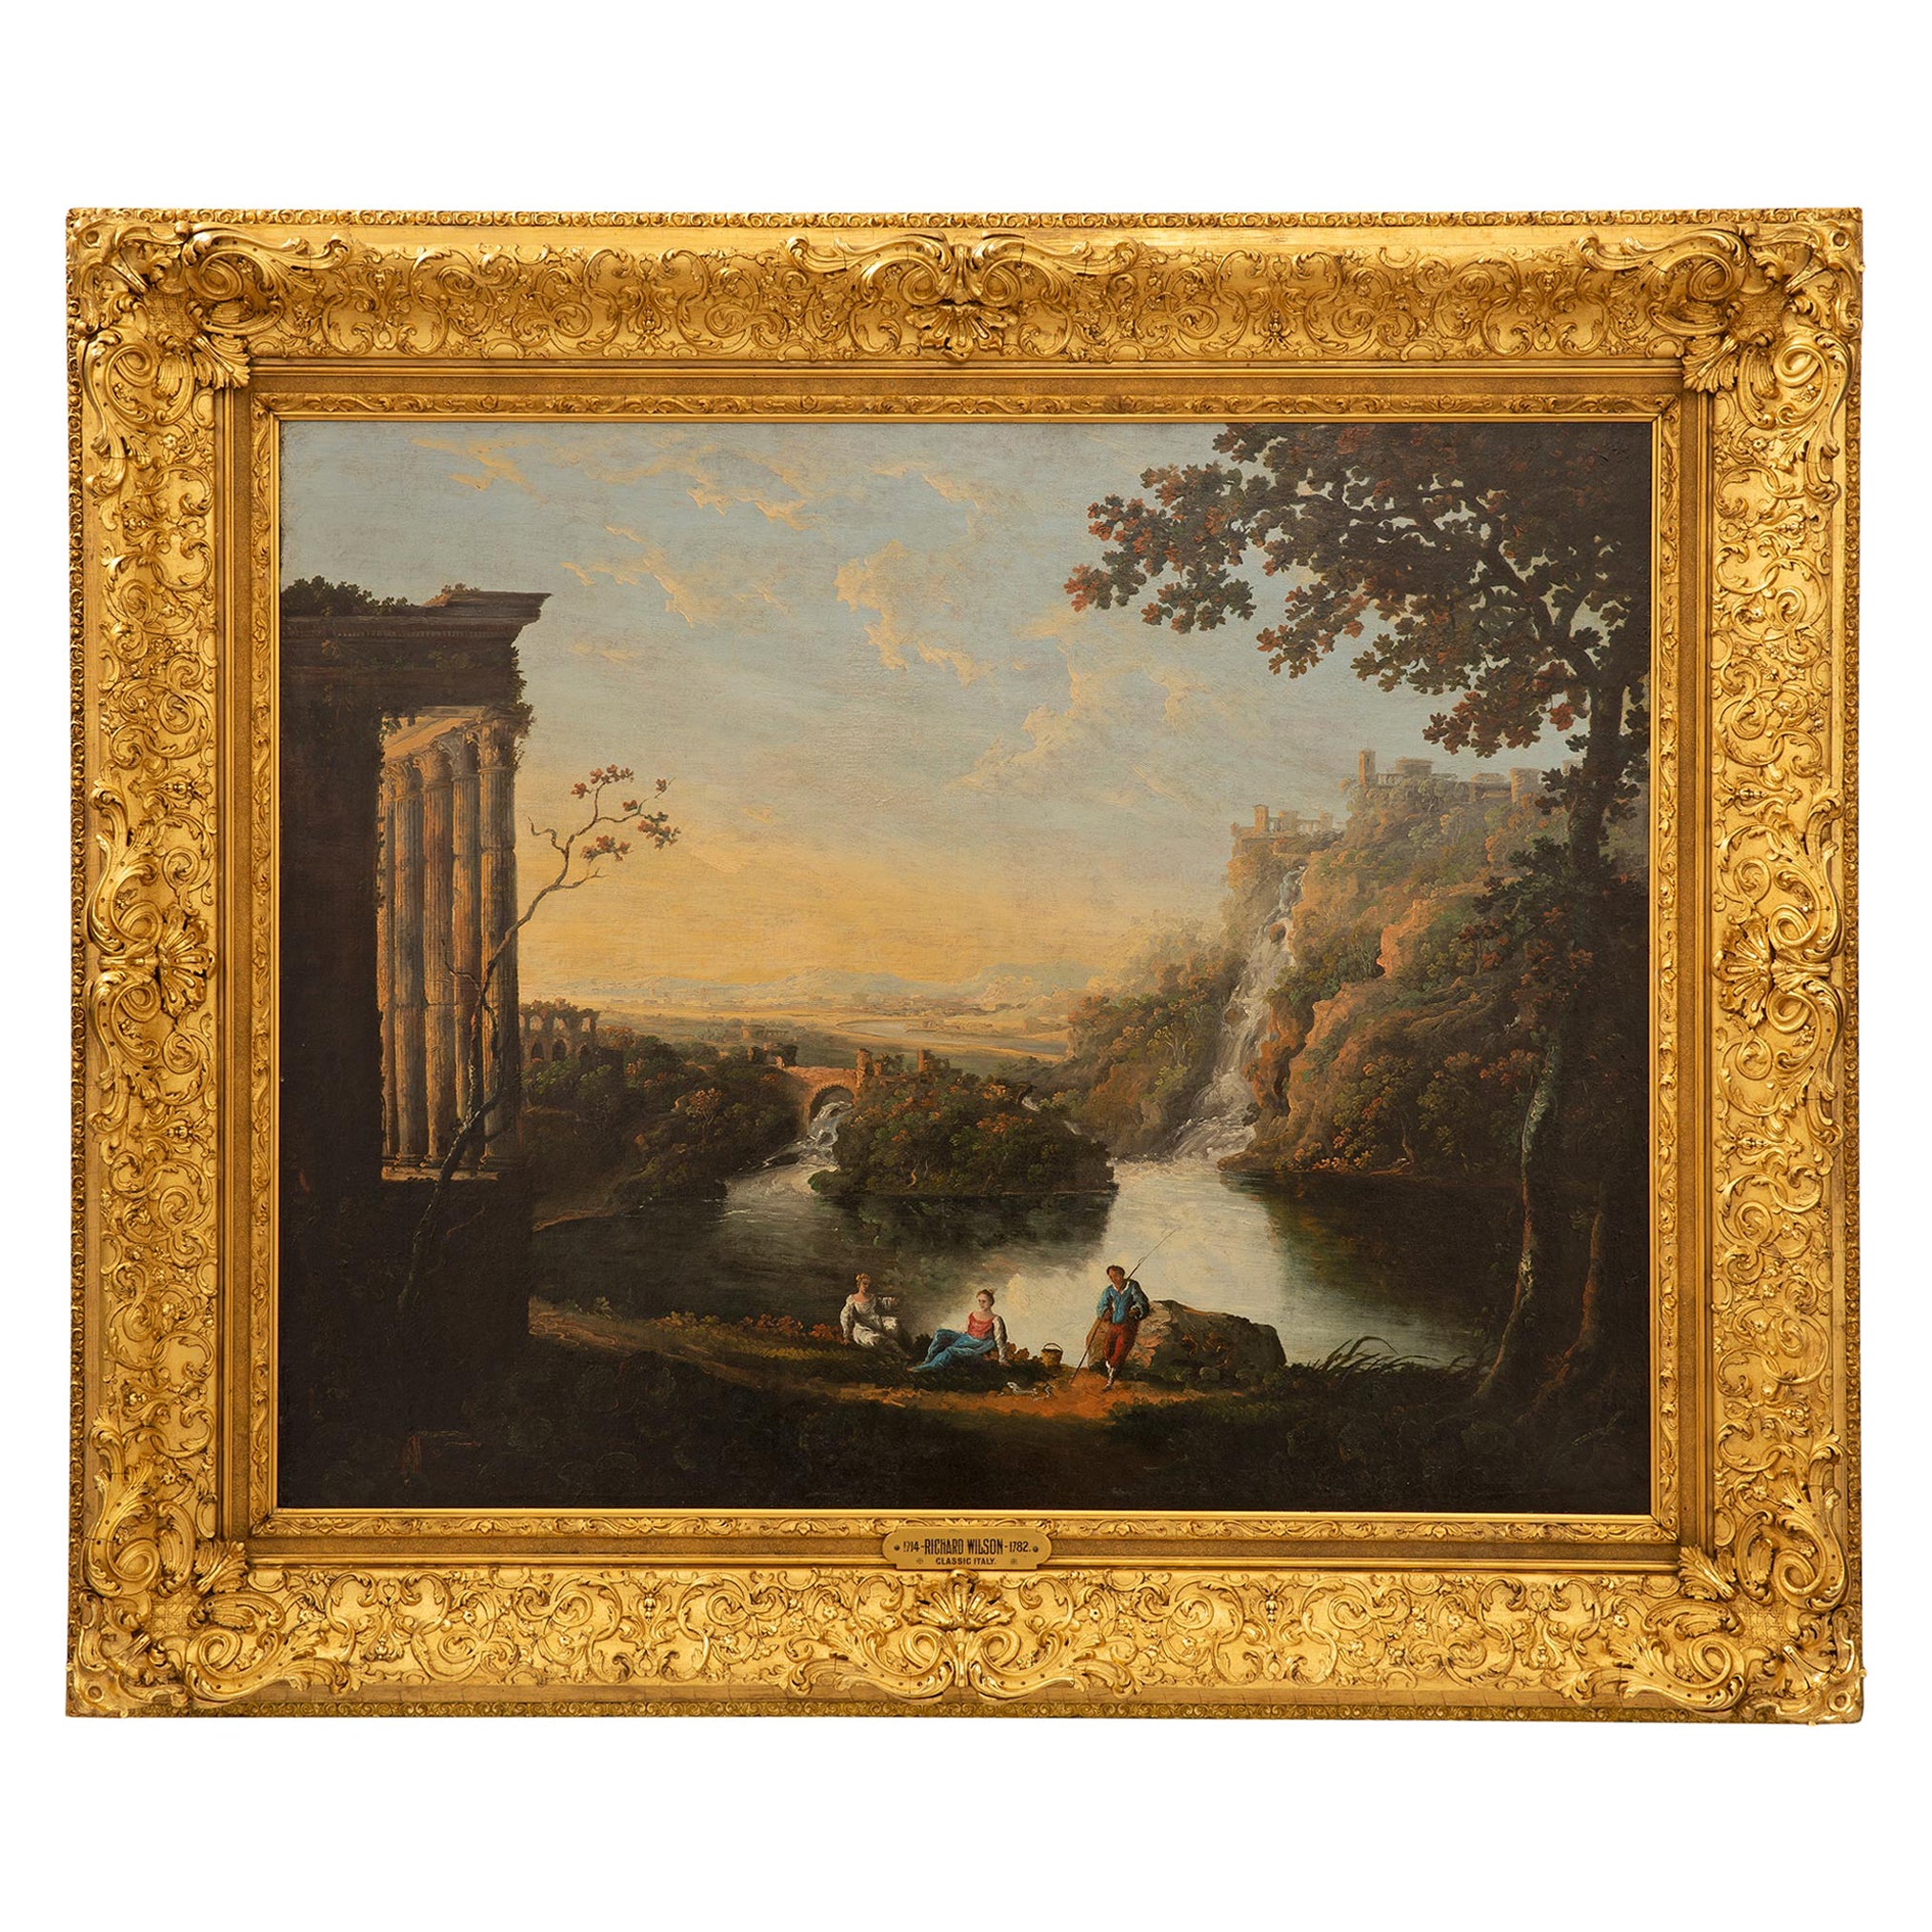 Welsh 18th Century Oil On Canvas Painting By Richard Wilson